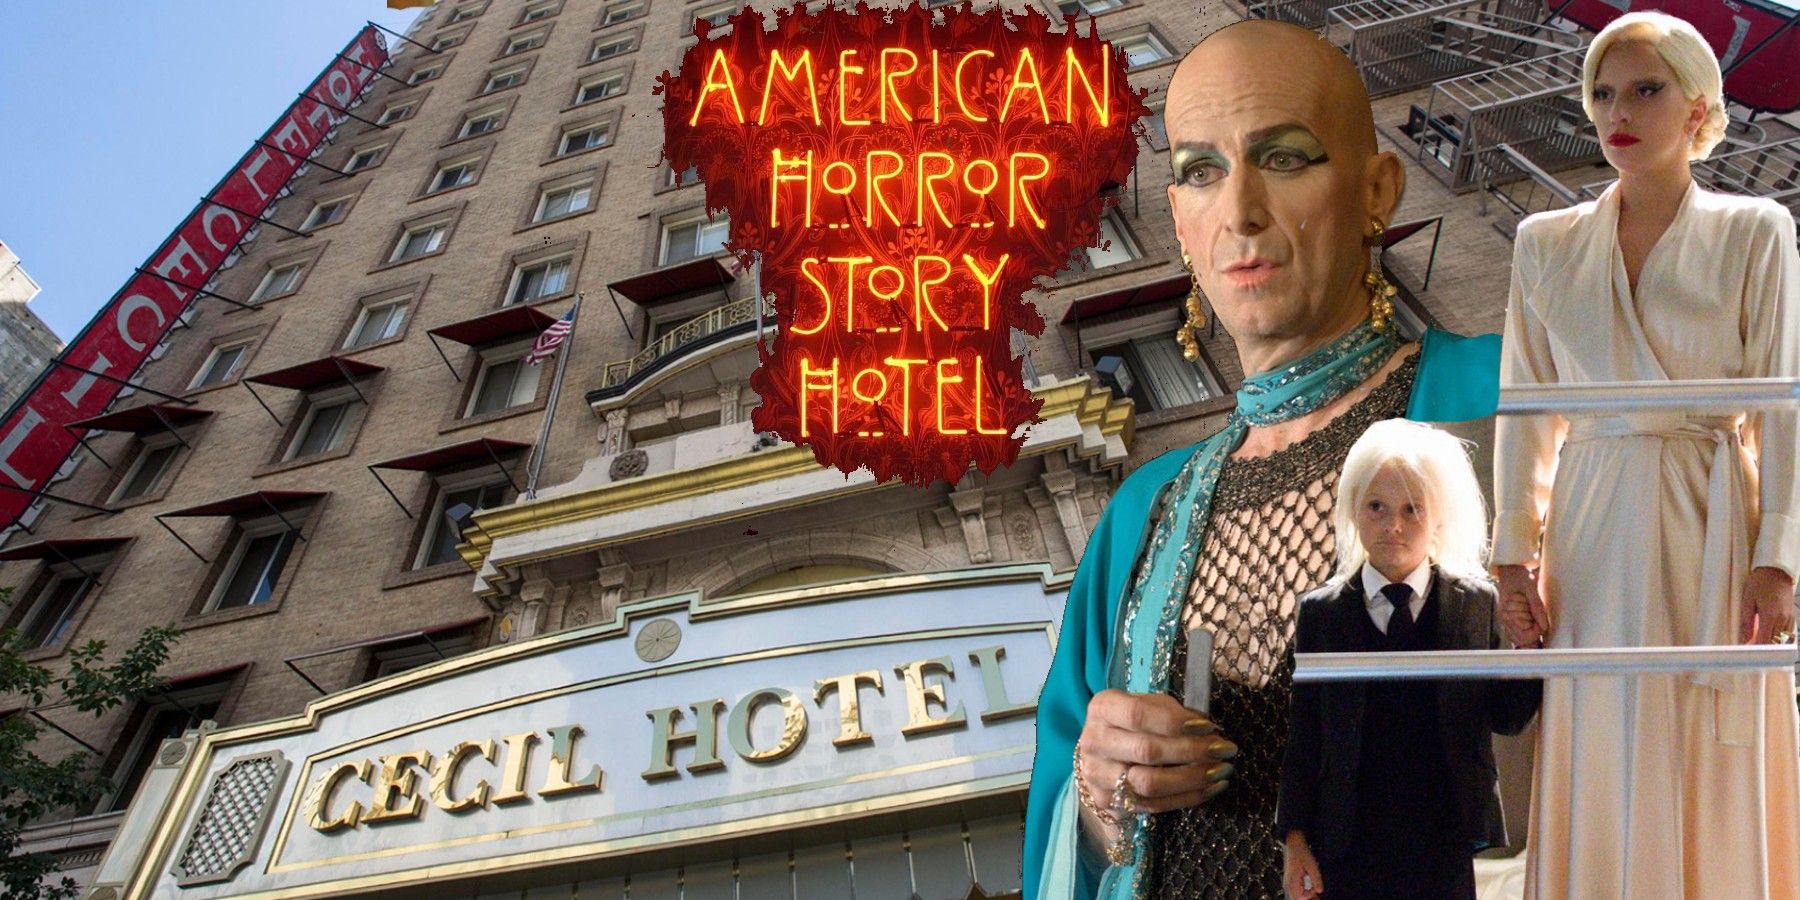 American Horror Story: Hotel: What Is The Real-Life Inspiration For This Season?